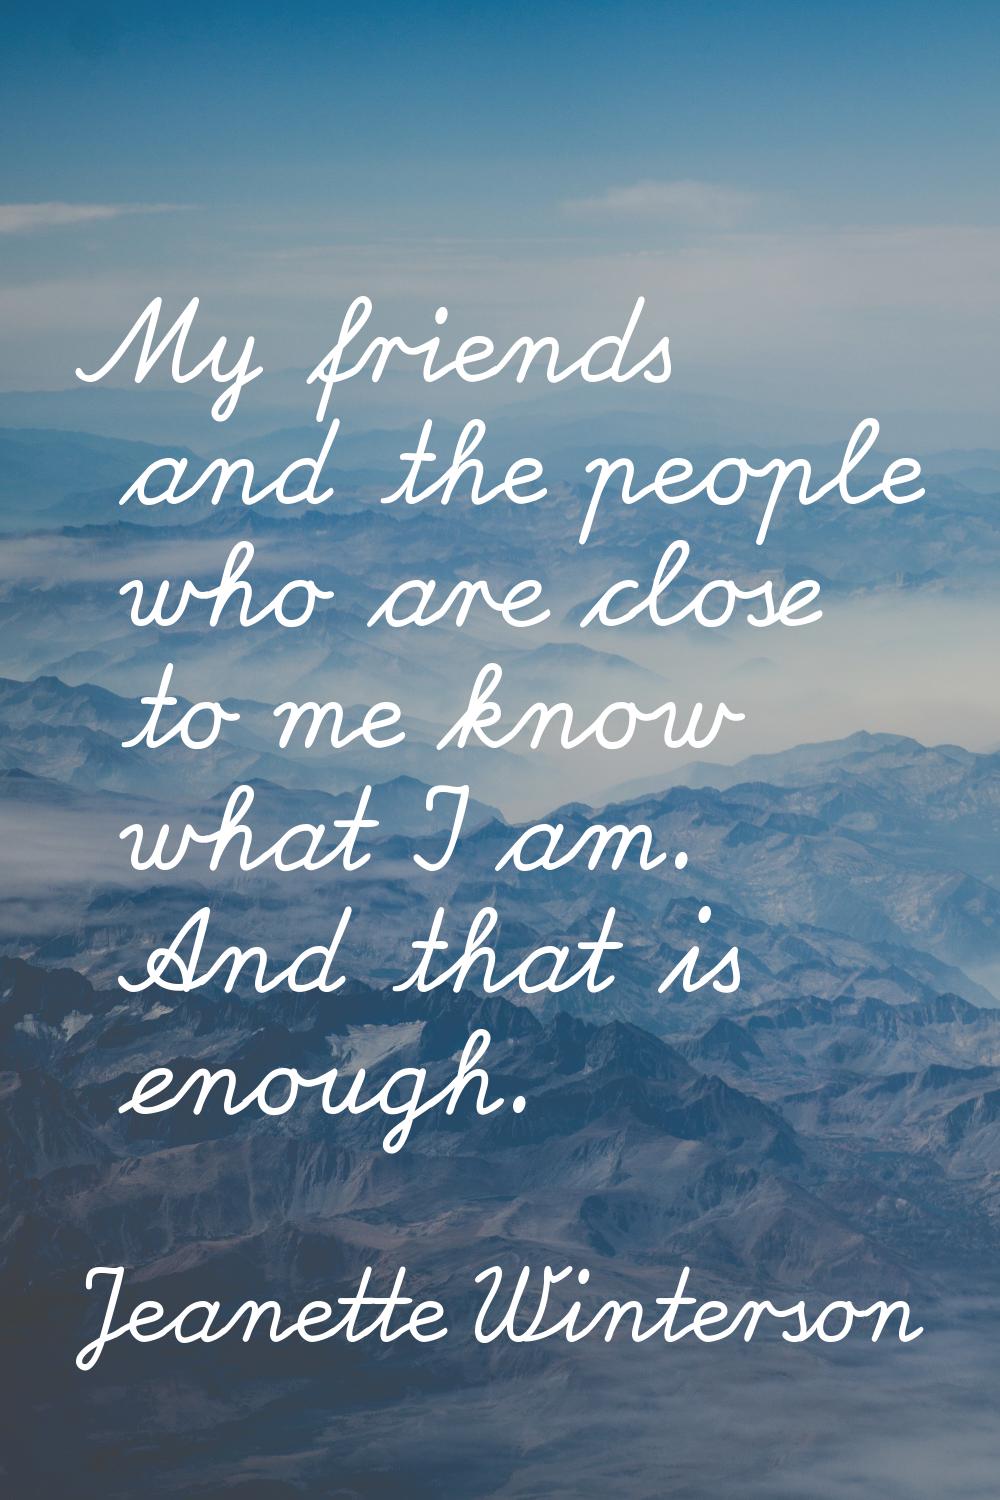 My friends and the people who are close to me know what I am. And that is enough.